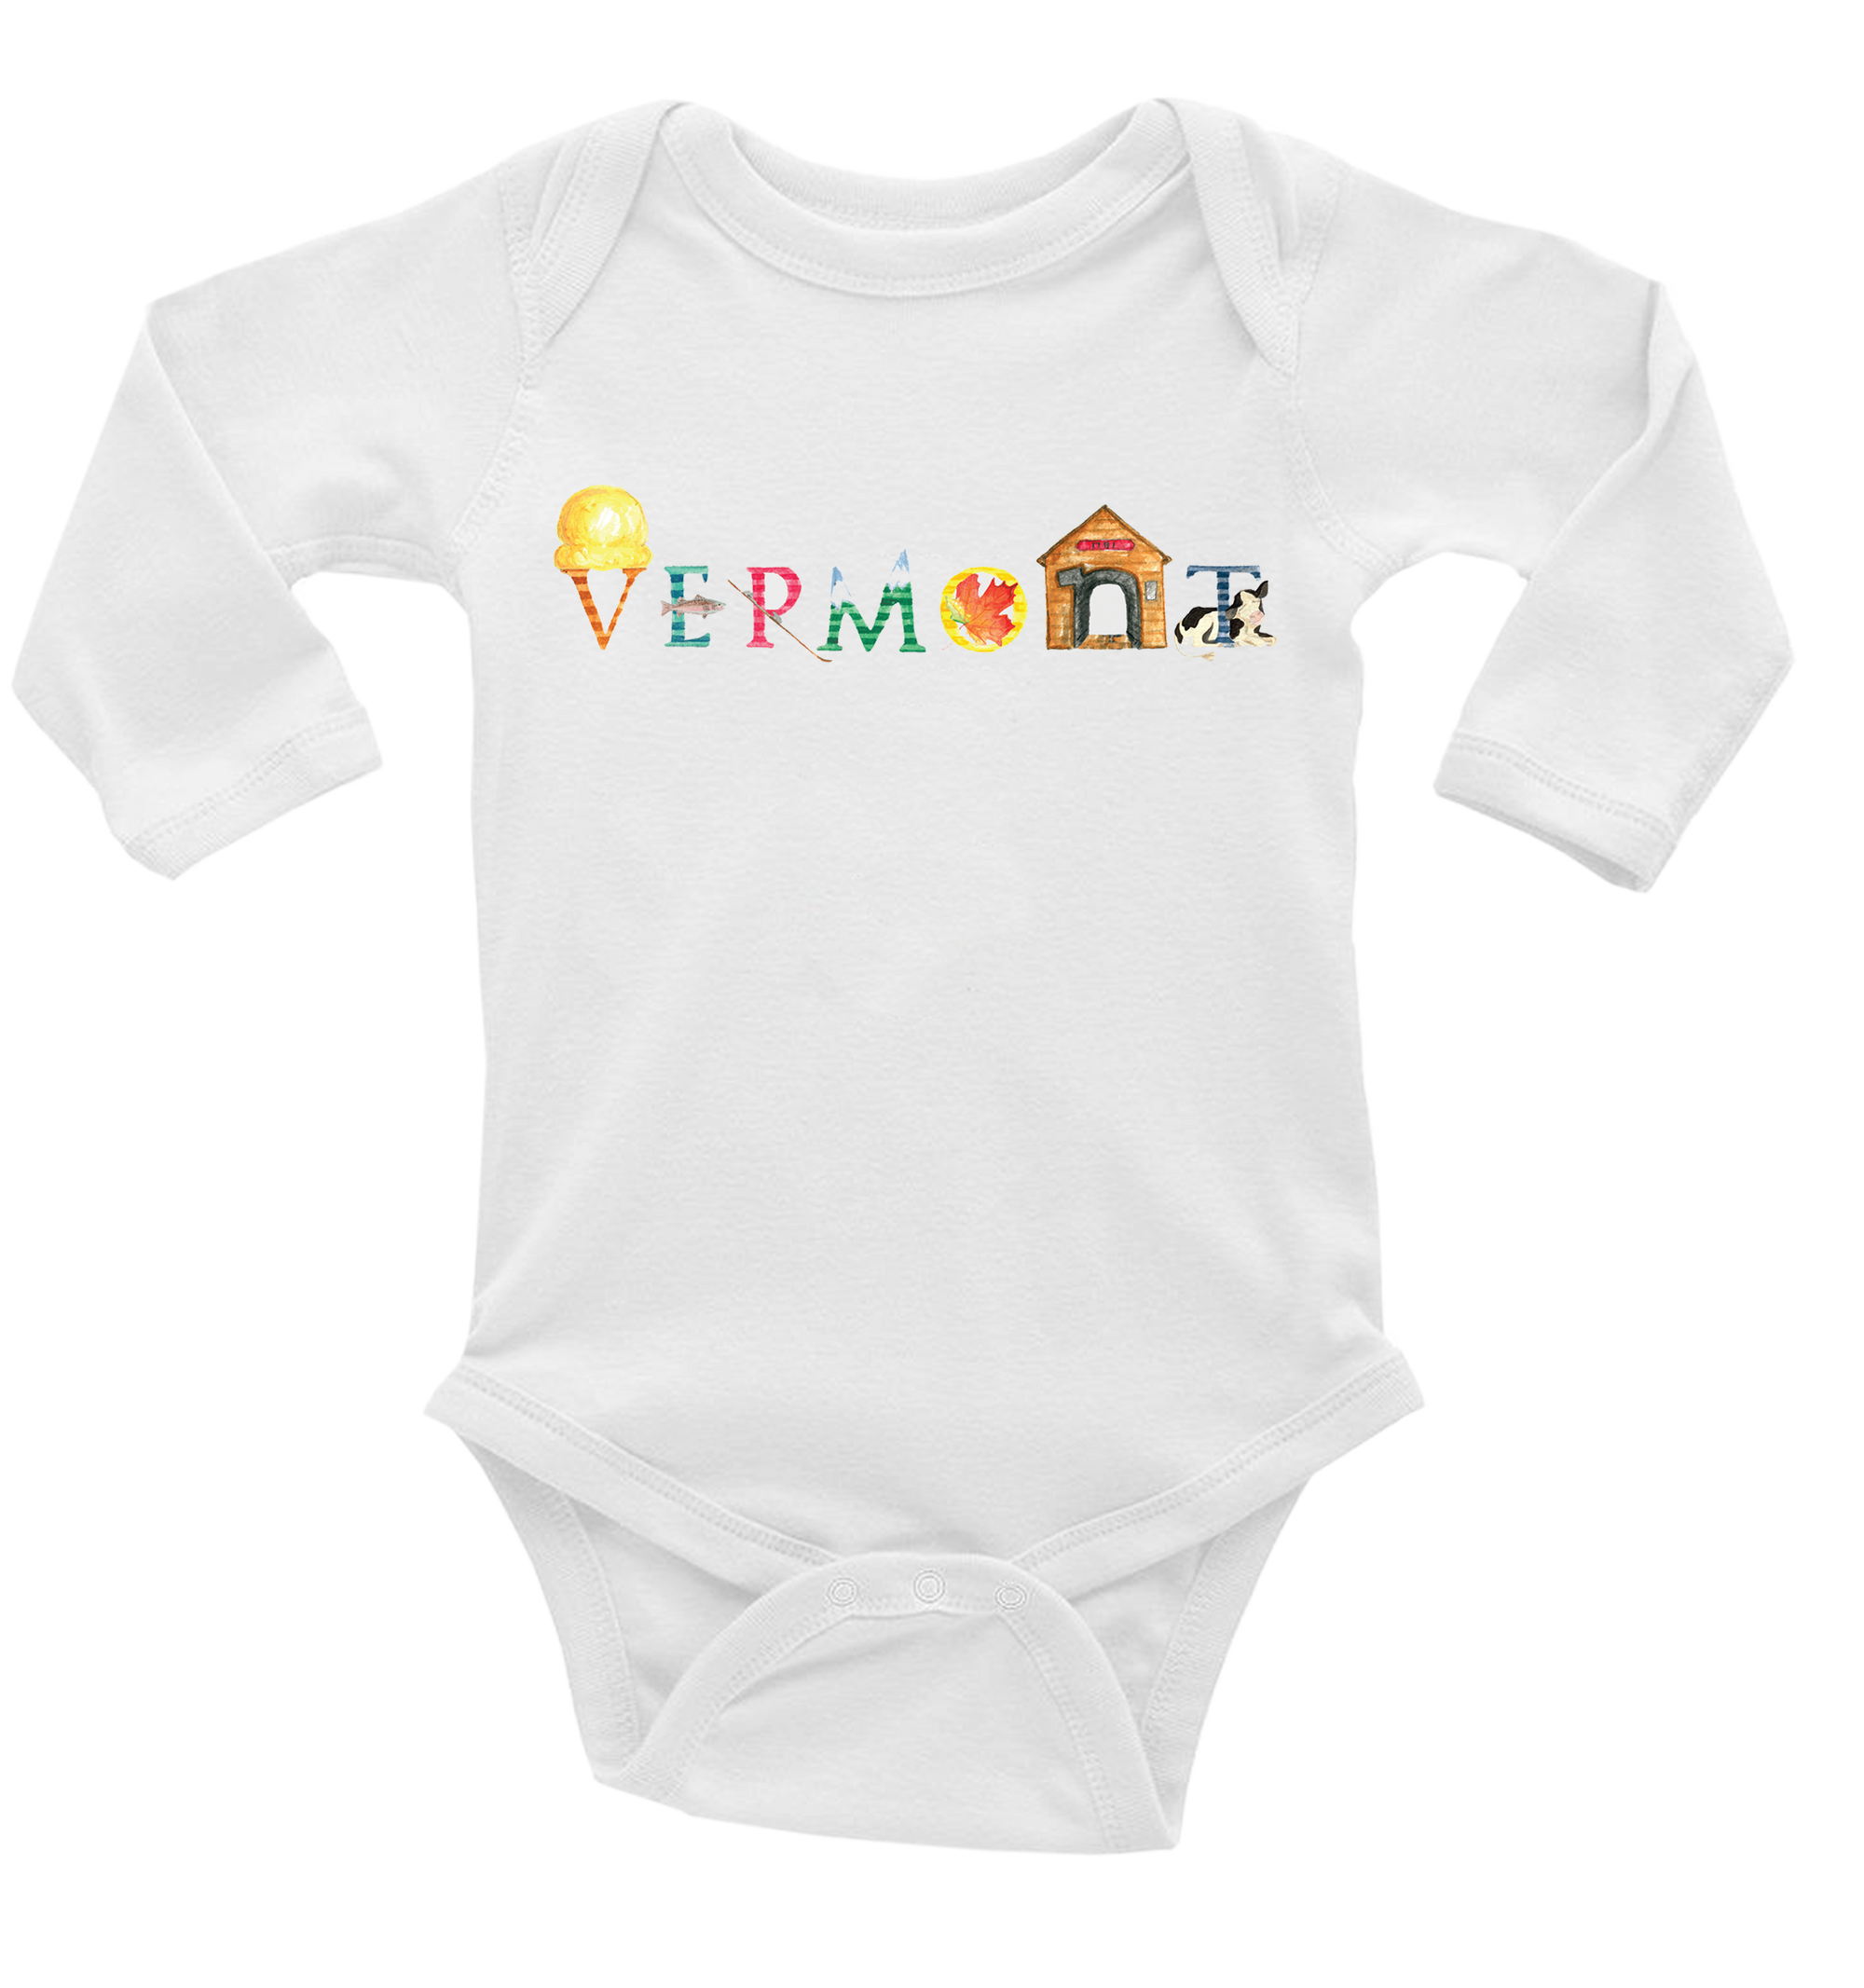 Vermont baby snap up long sleeve